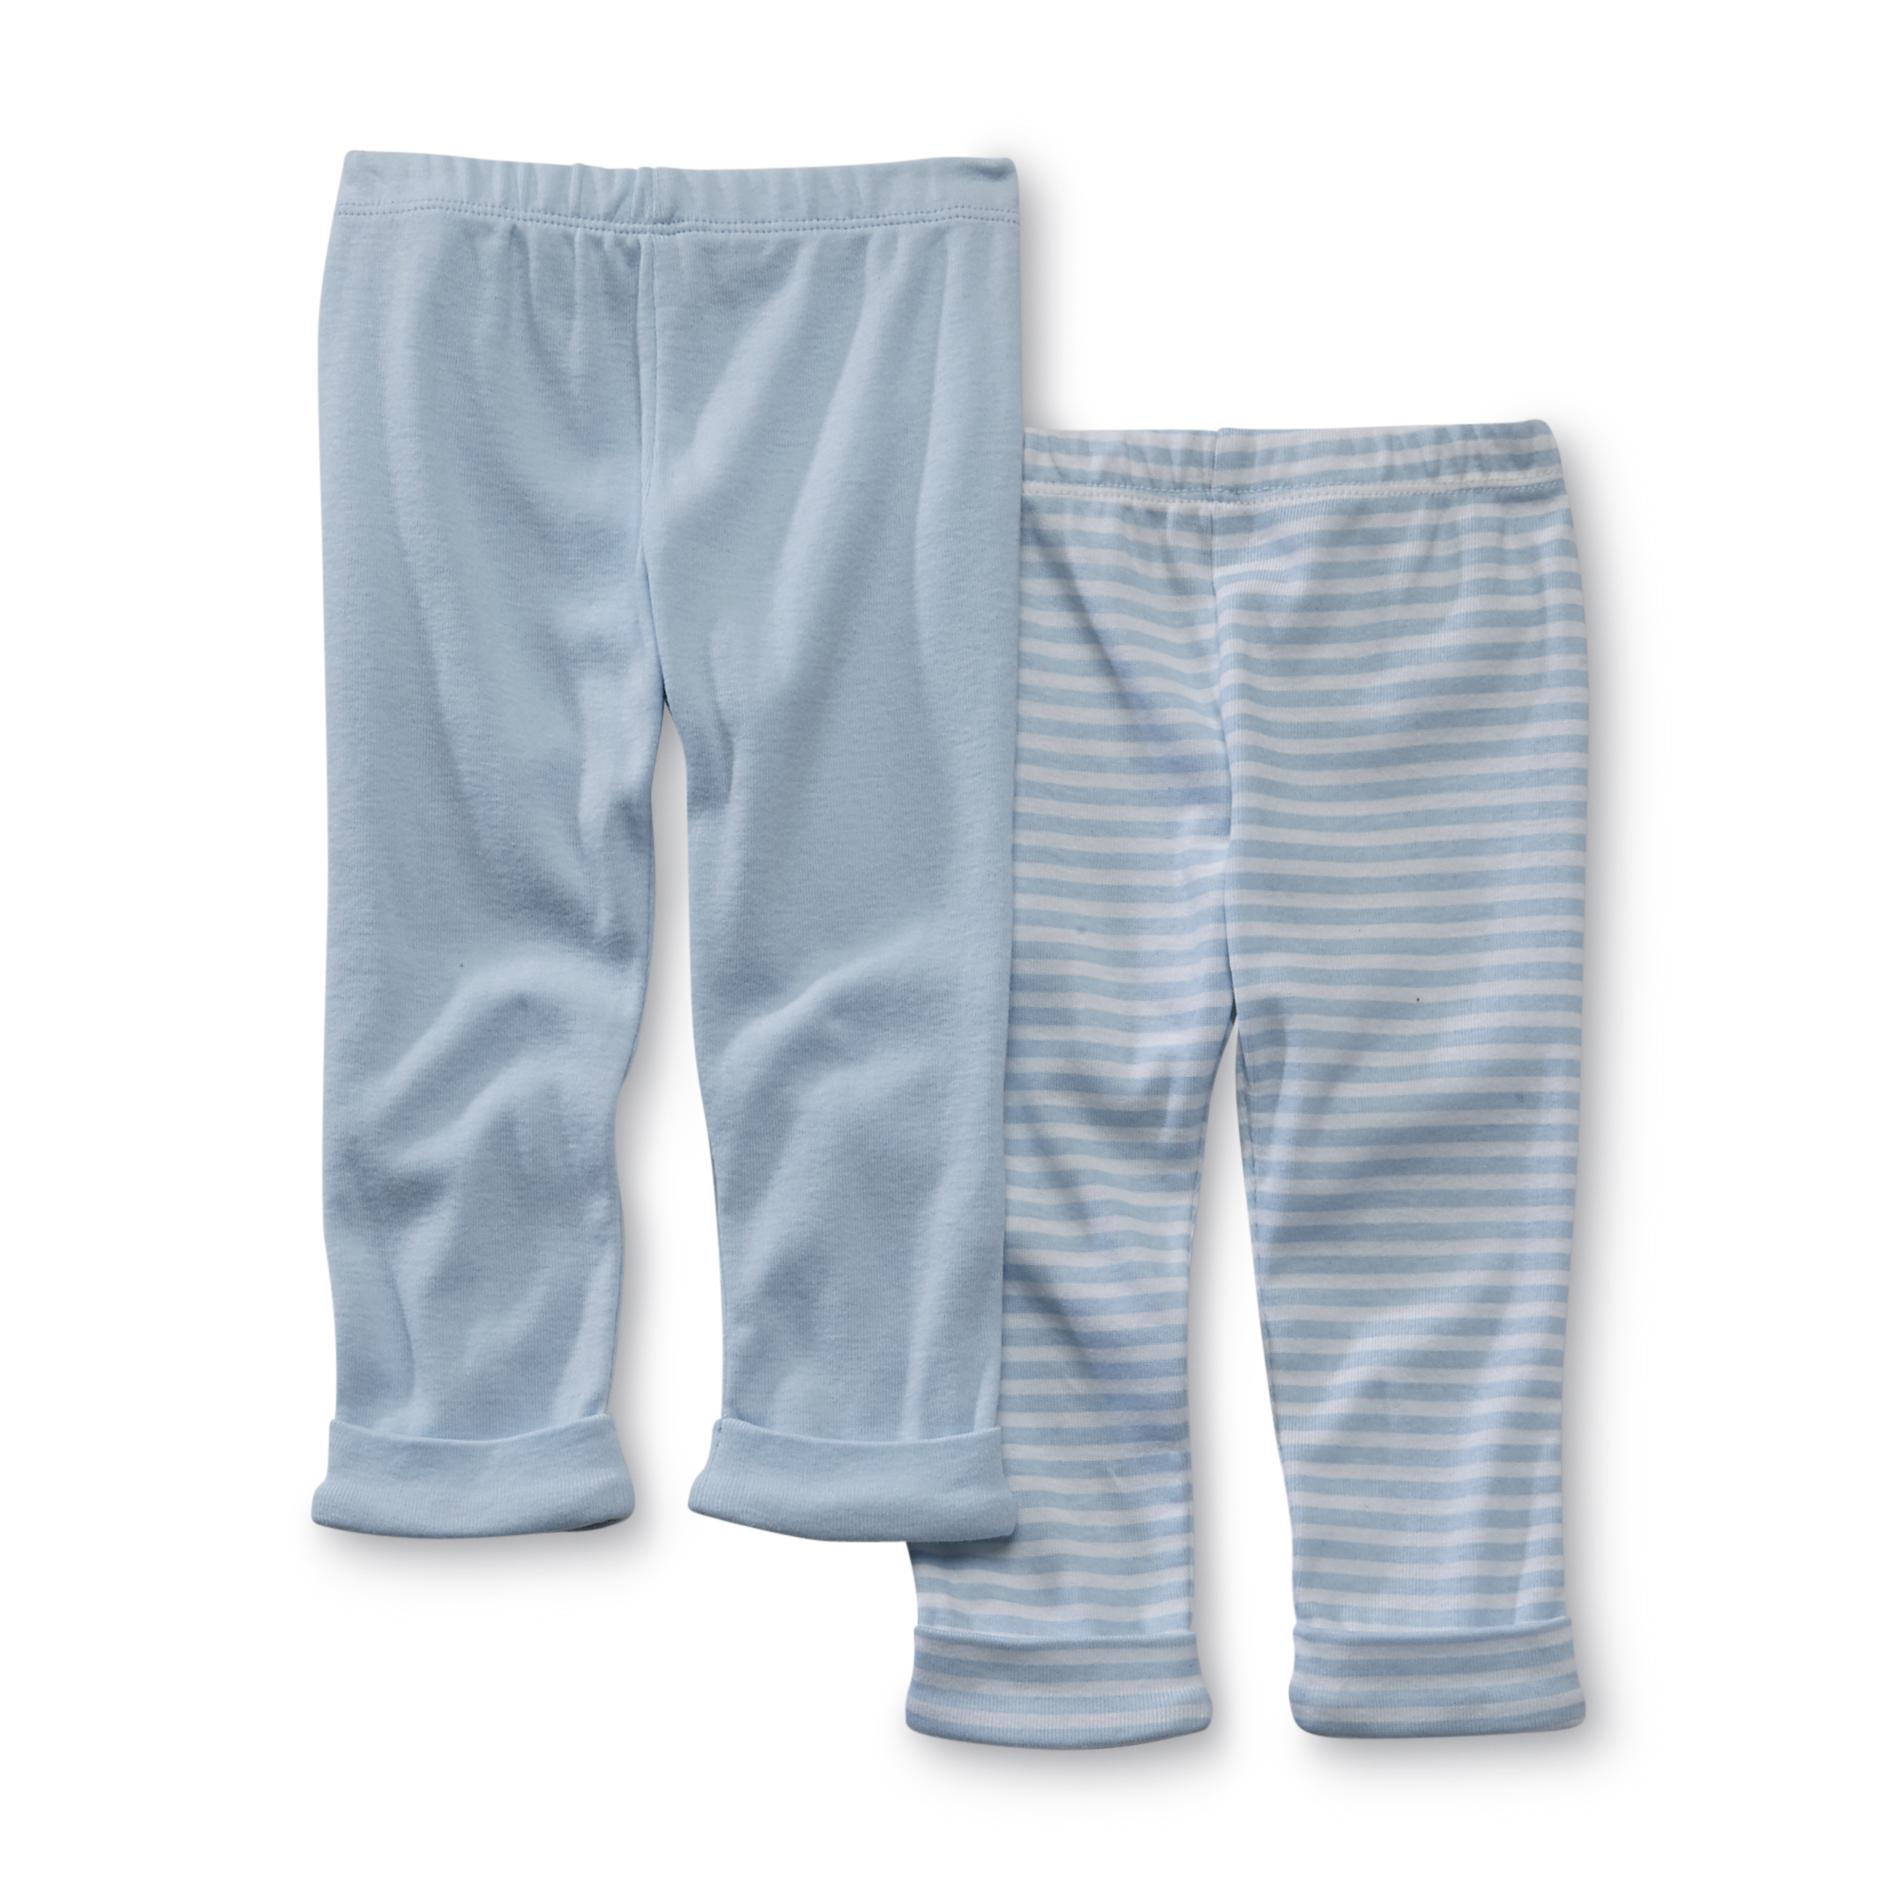 Welcome to the World Infant's Boy's 2-Pack Knit Pants